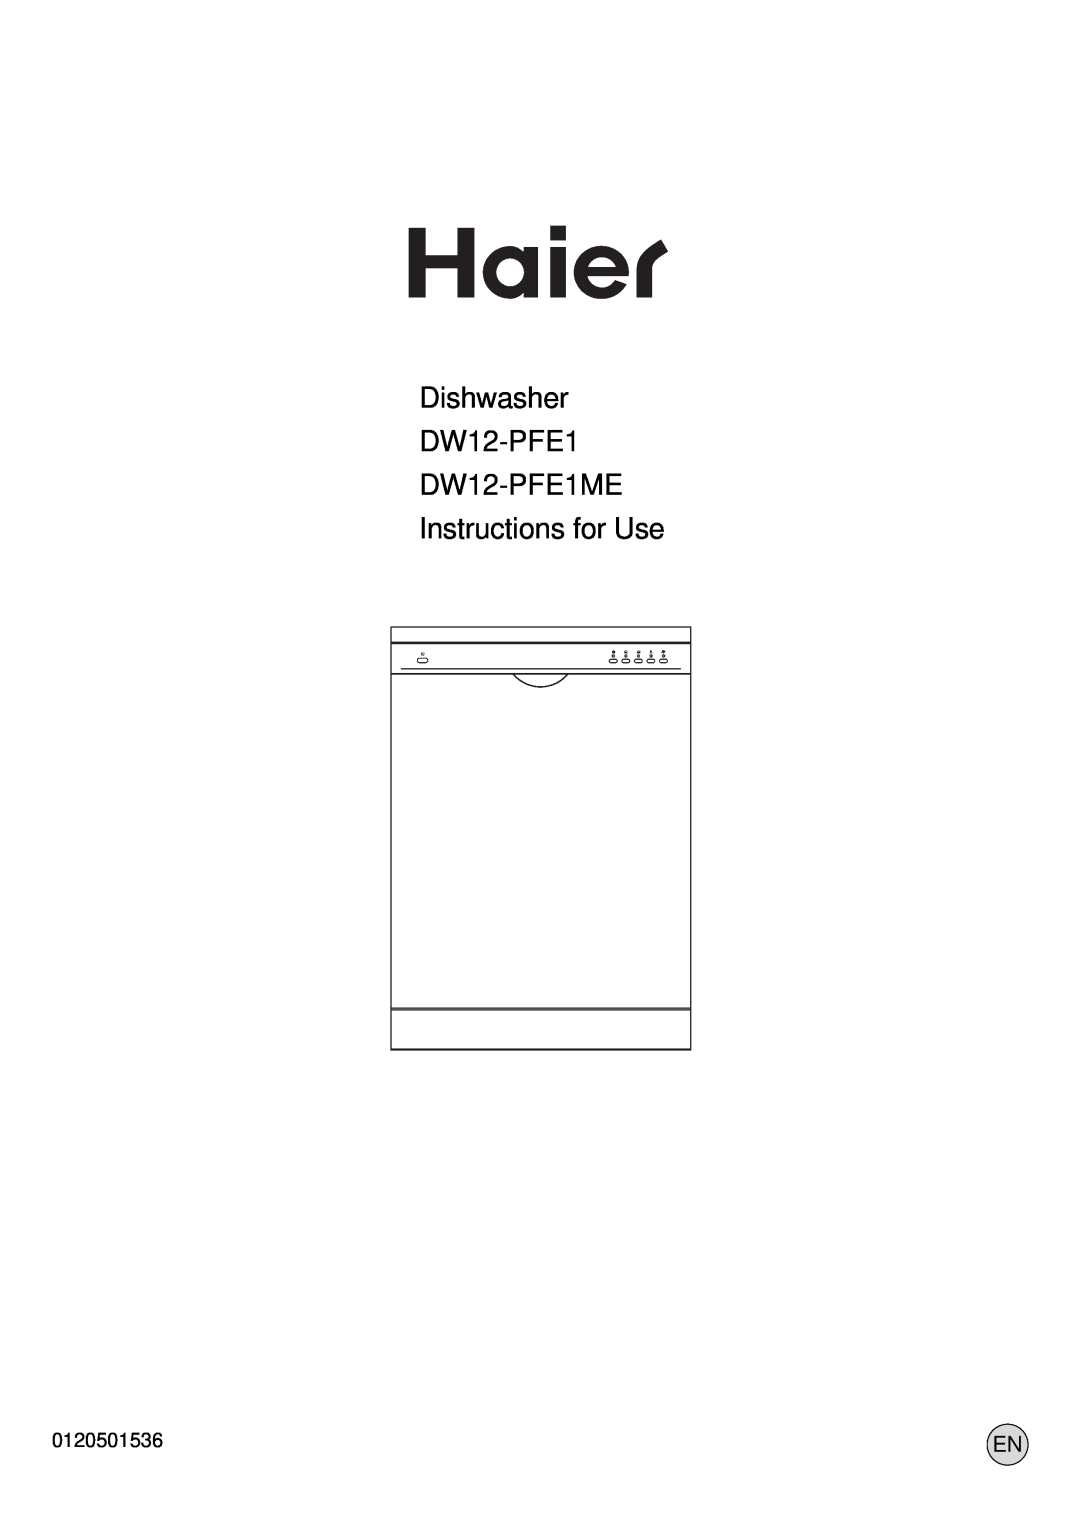 Haier manual Dishwasher DW12-PFE1 DW12-PFE1ME, Instructions for Use, 0120501536 